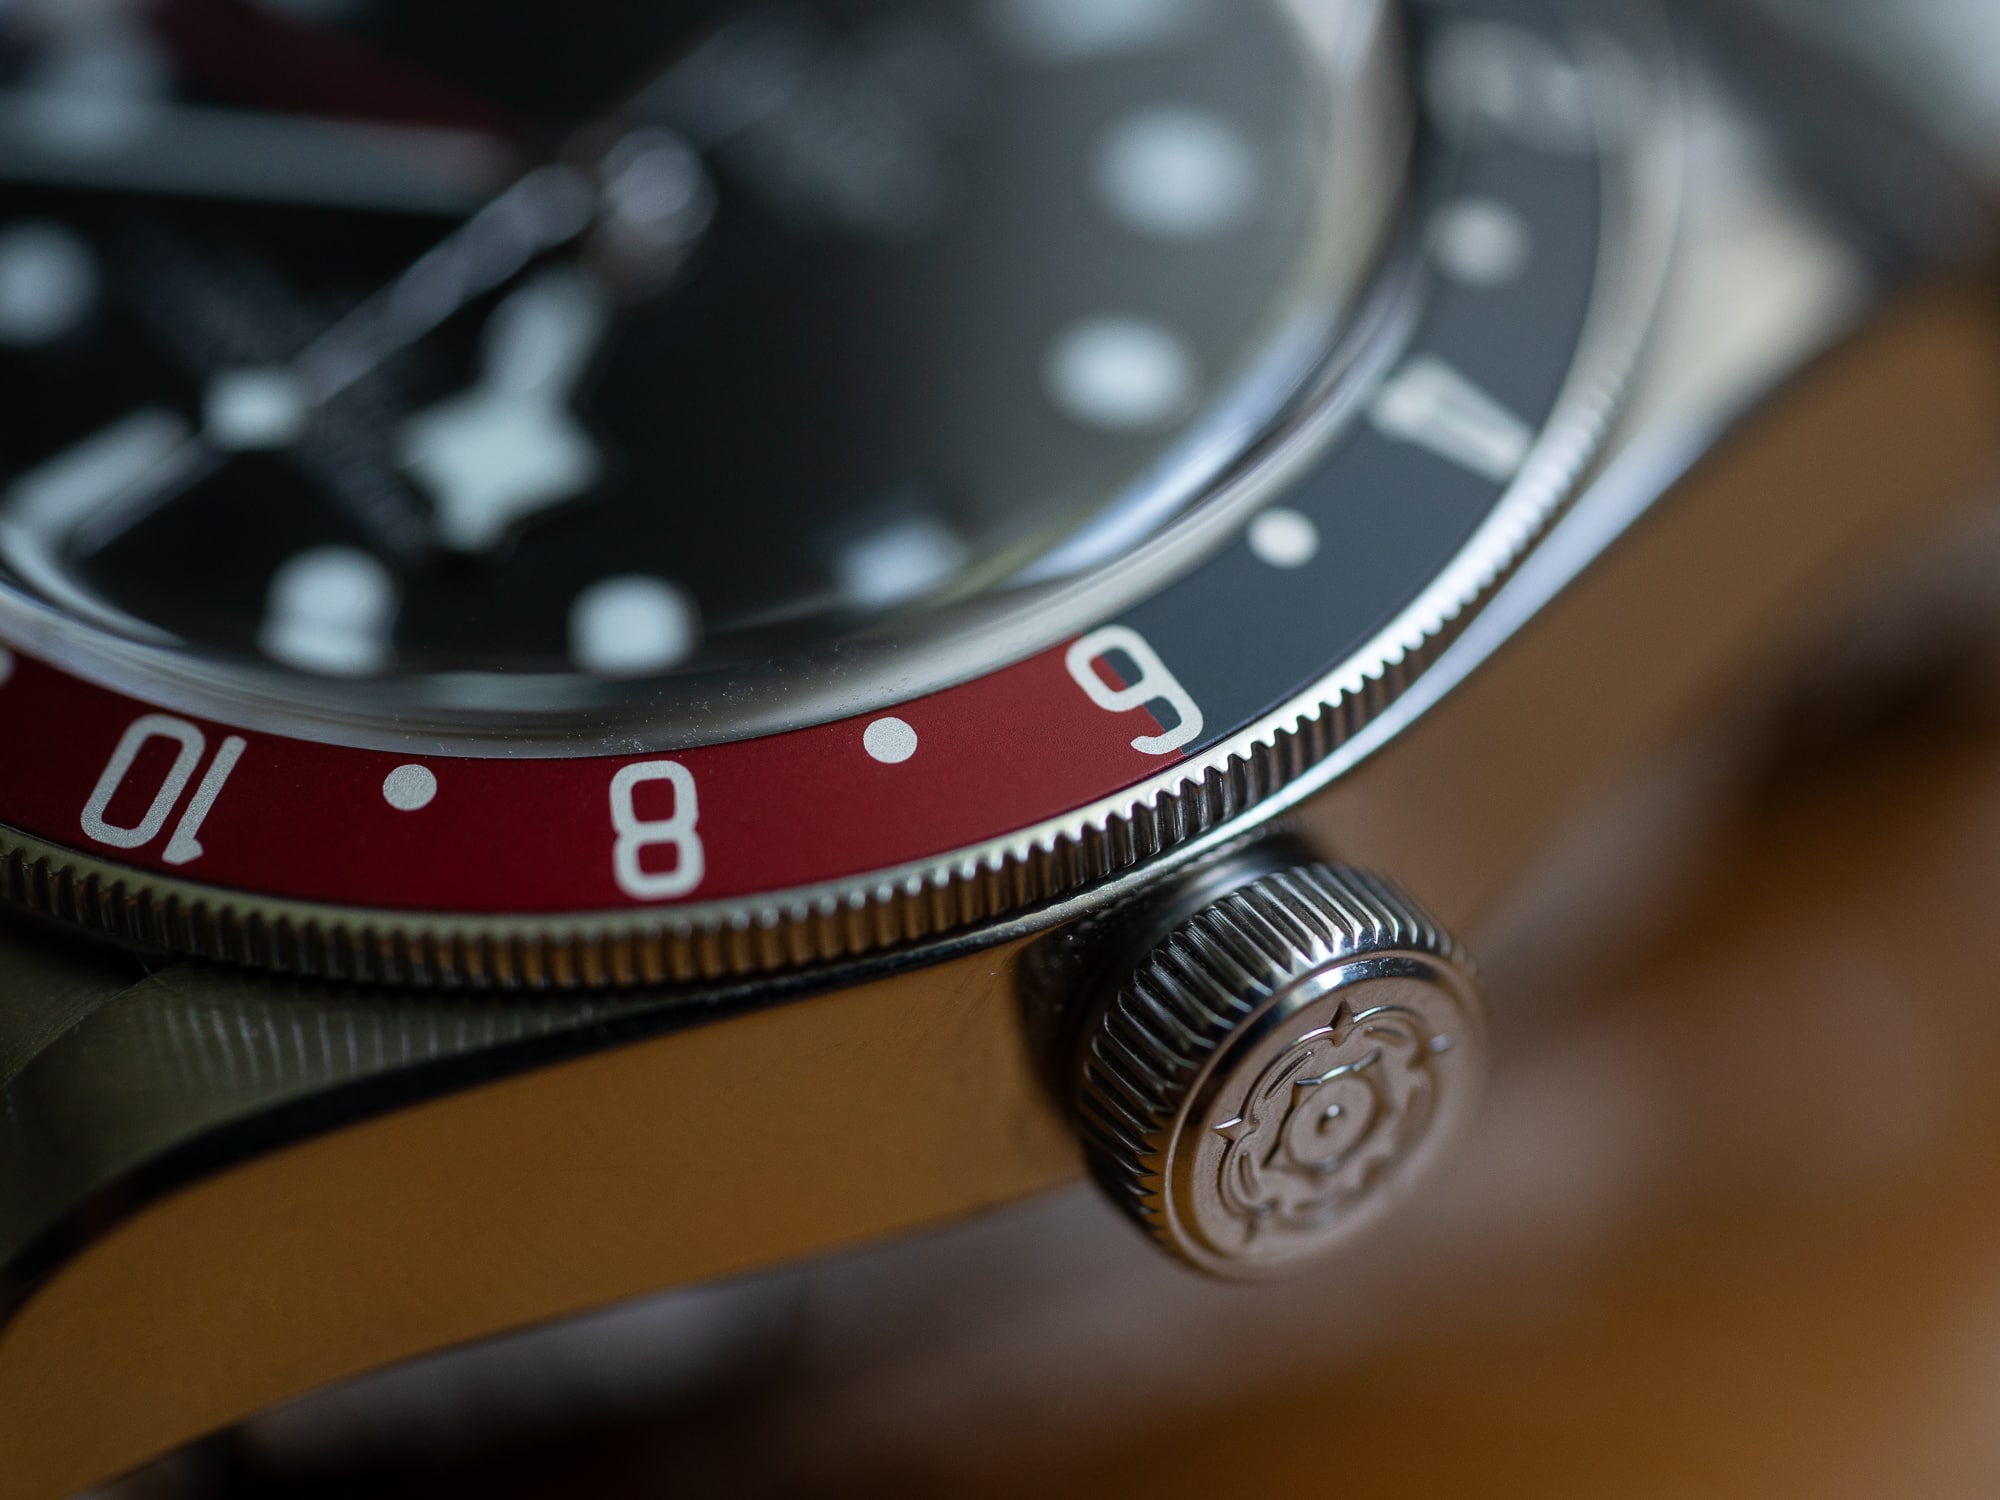 Tudor Black Bay GMT: Is It The Perfect Travel Watch For You?